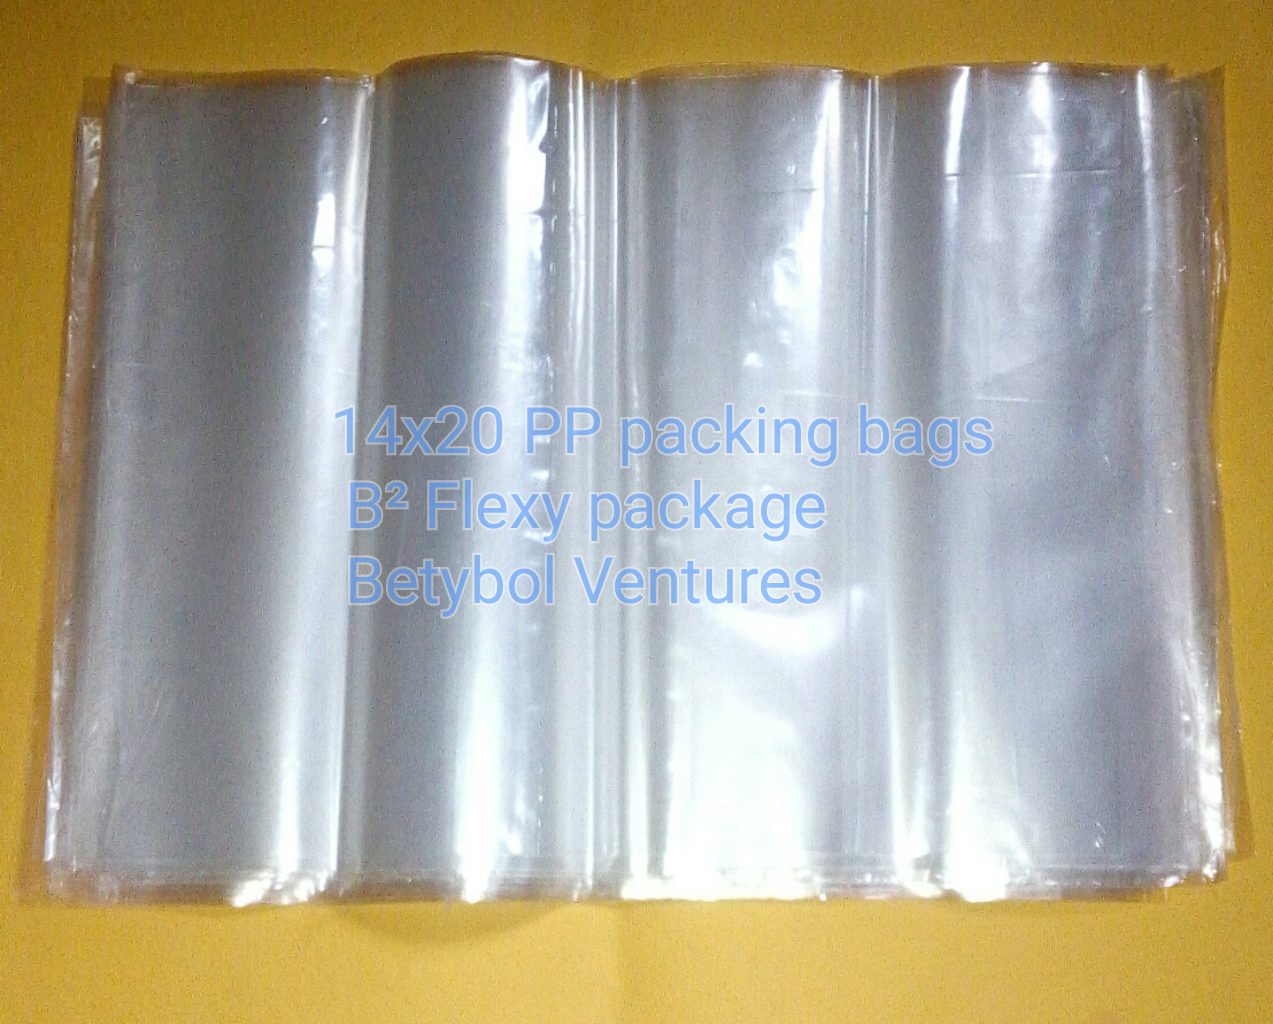 Packaging and shopping bags